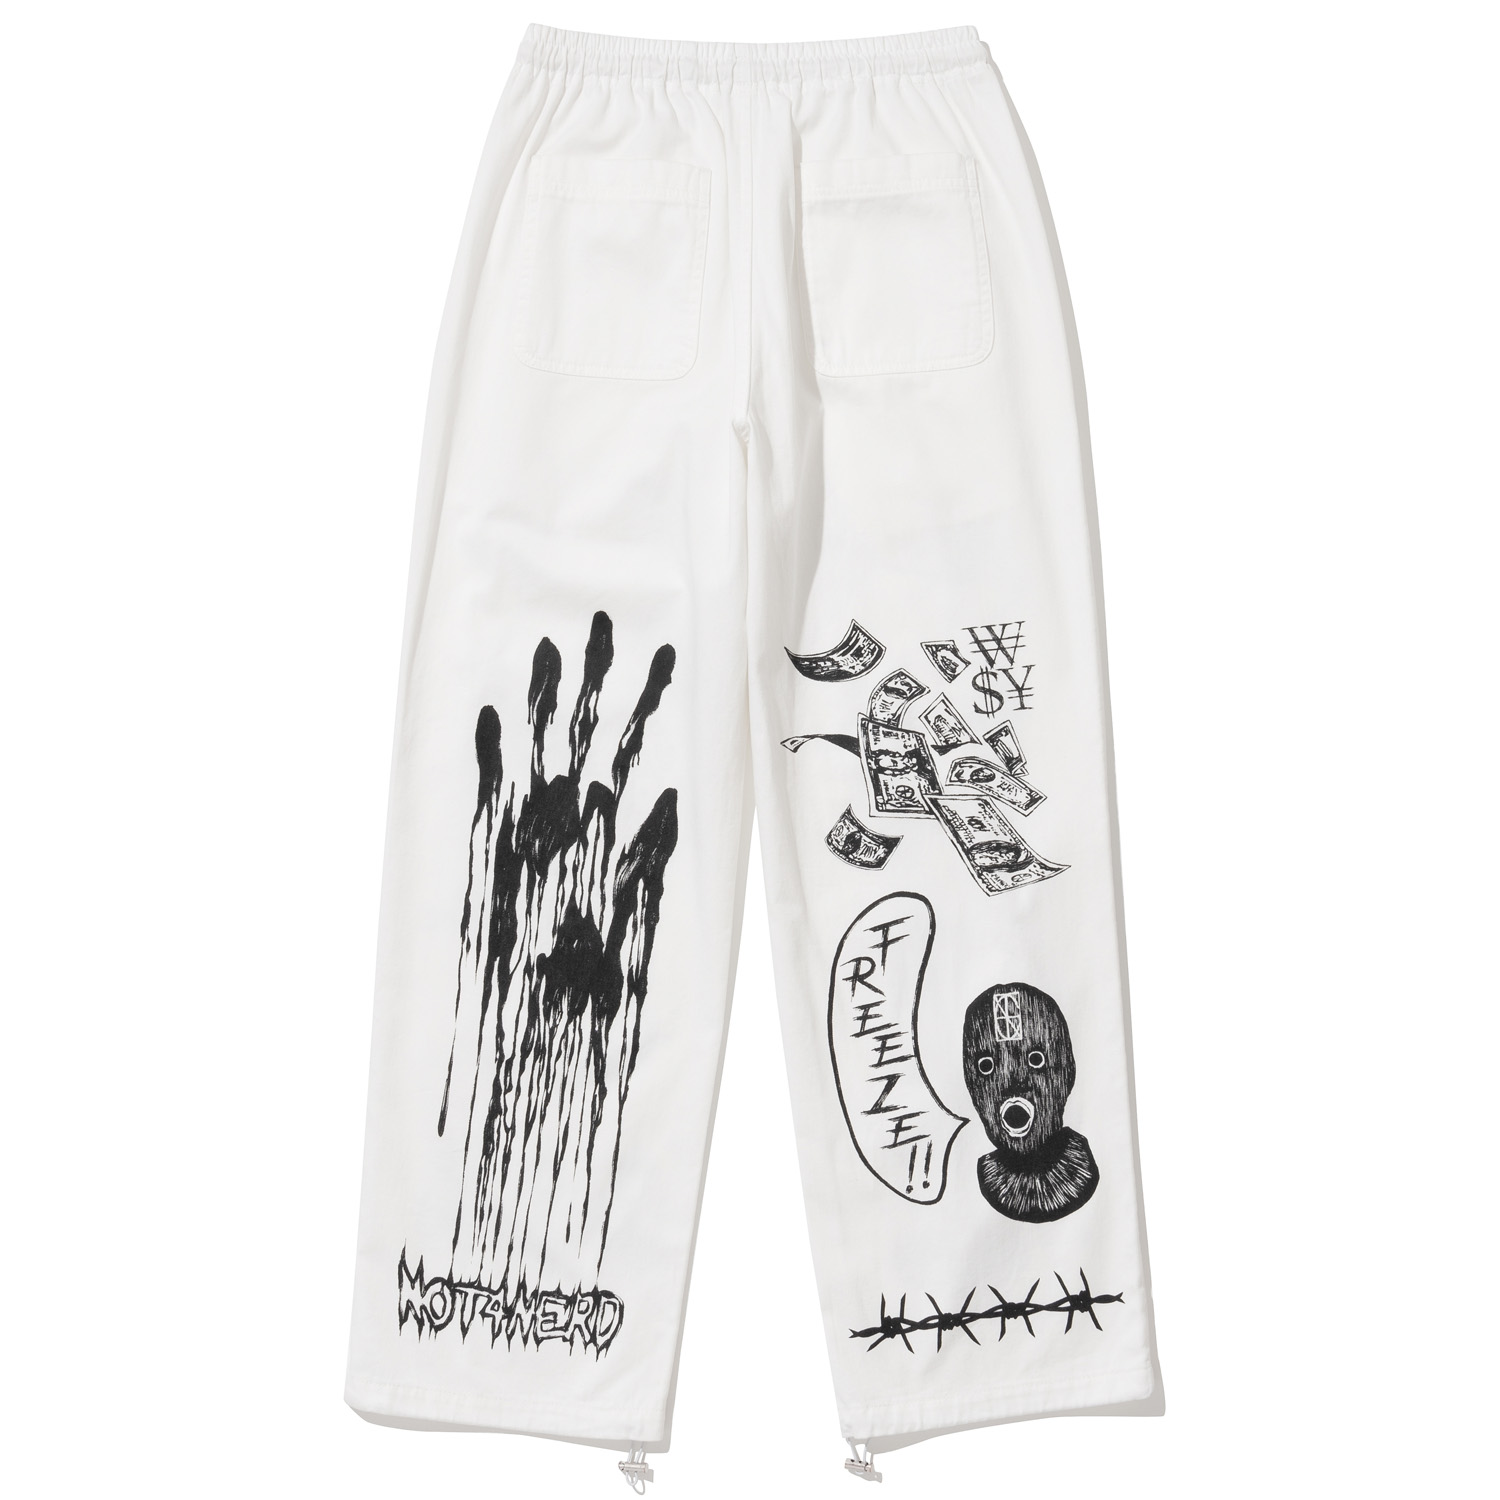 Graphic Printed Cotton Pants - Ivory,NOT4NERD